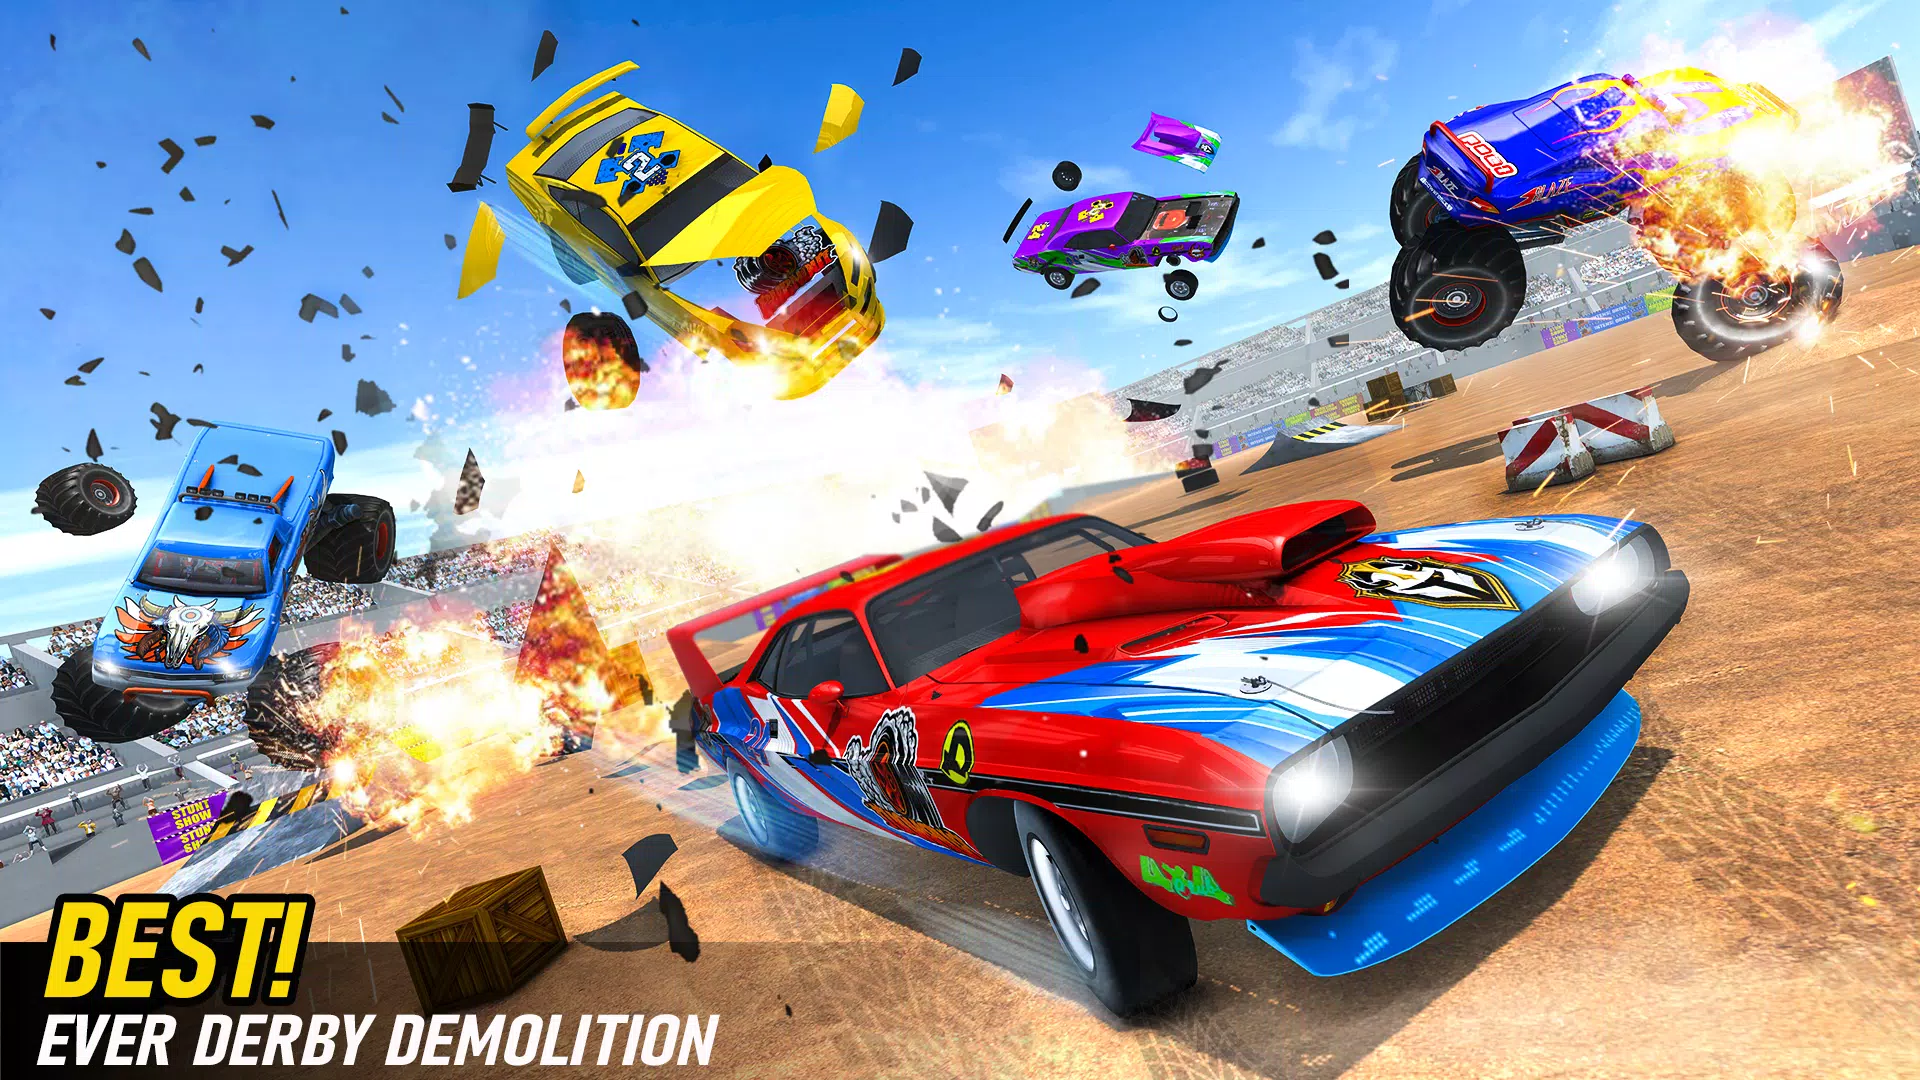 Muscle Car Demolition Derby for Android - APK Download